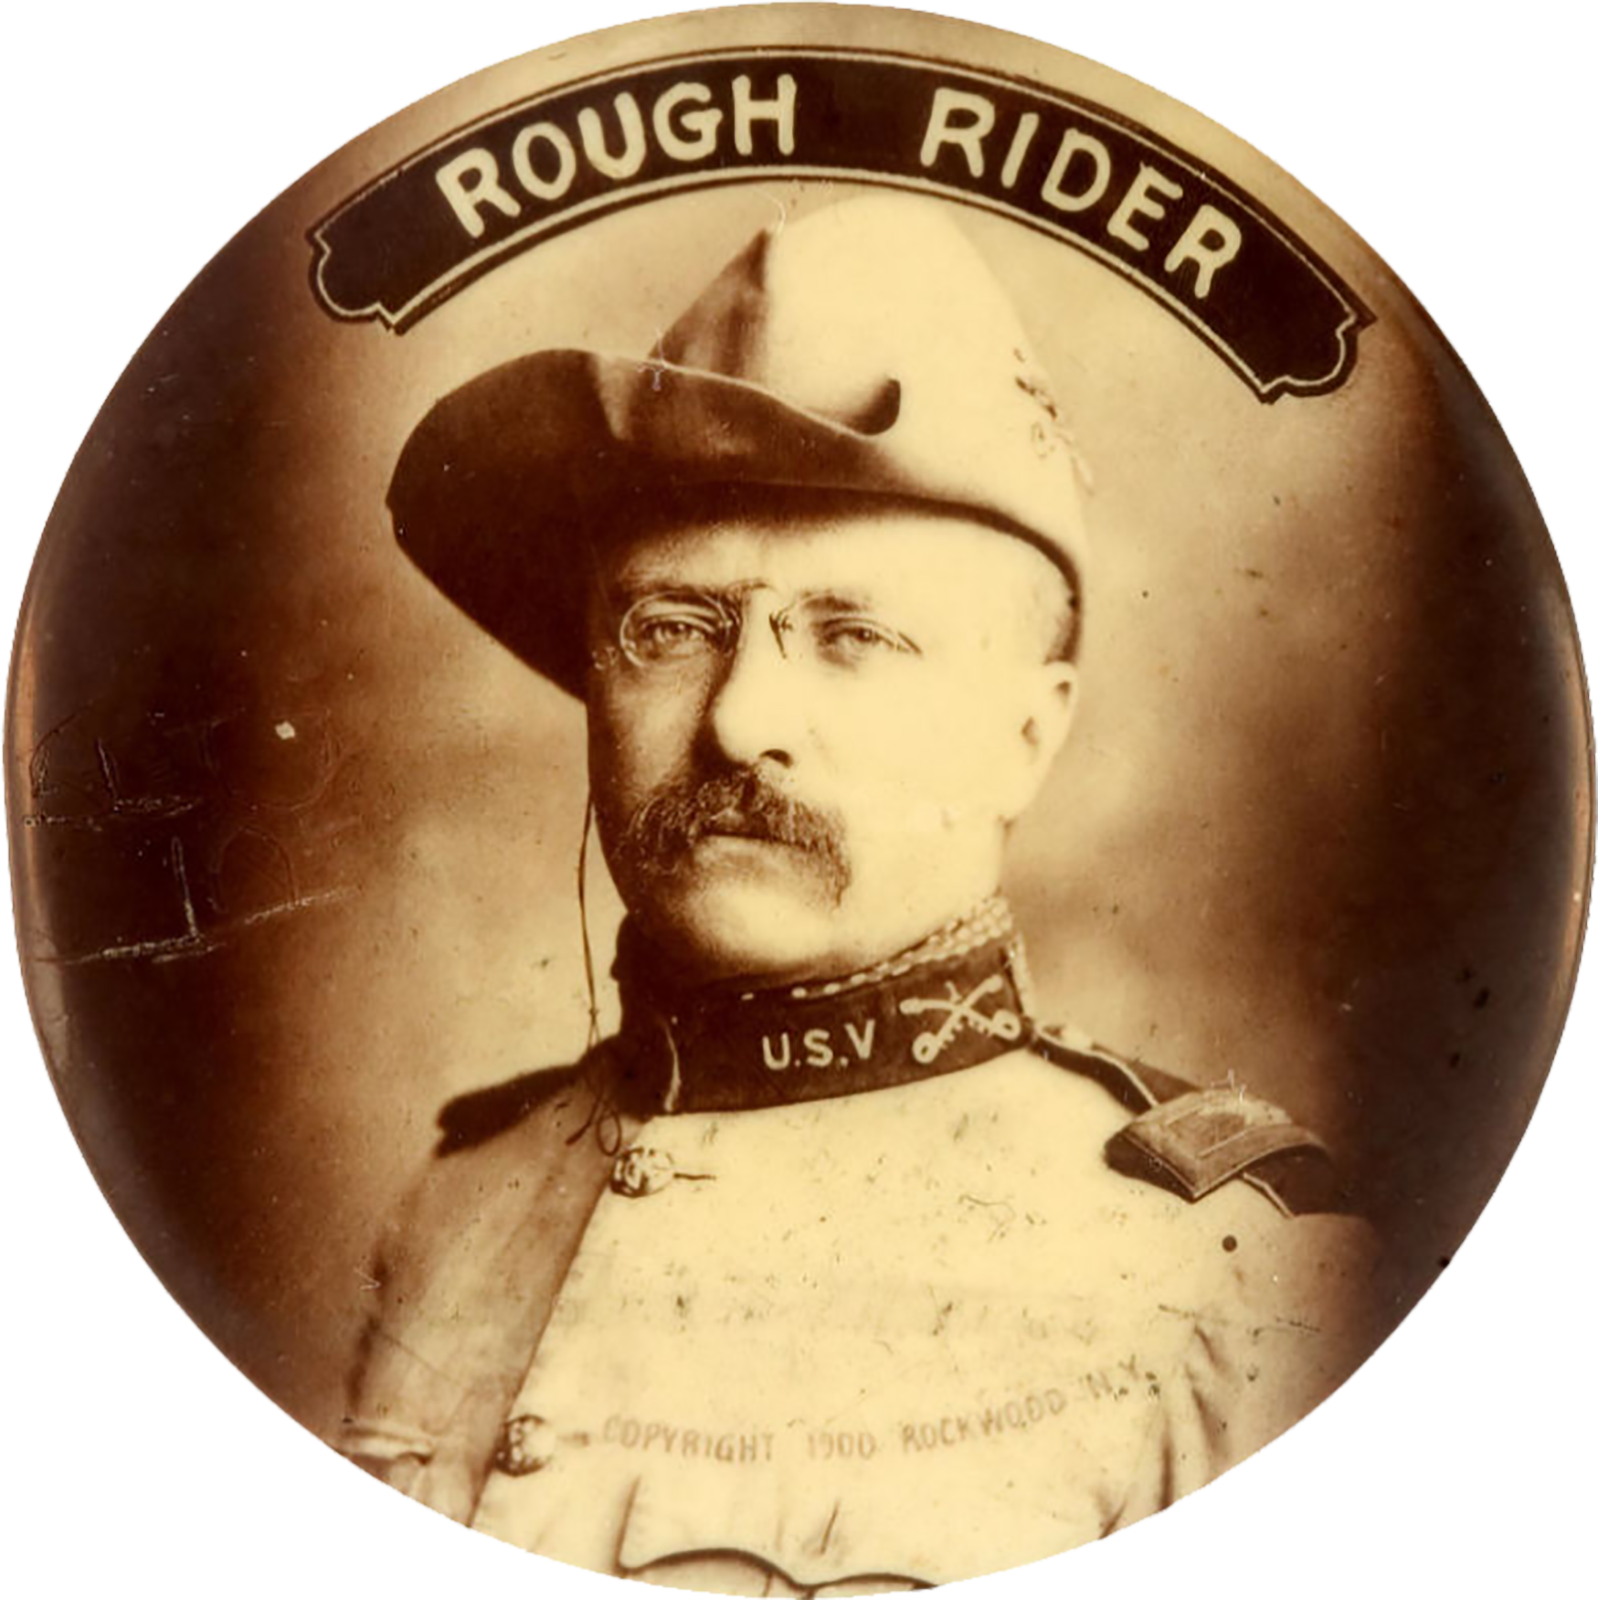 Sepia-toned round image of Rough Rider Theodore Roosevelt in a military uniform